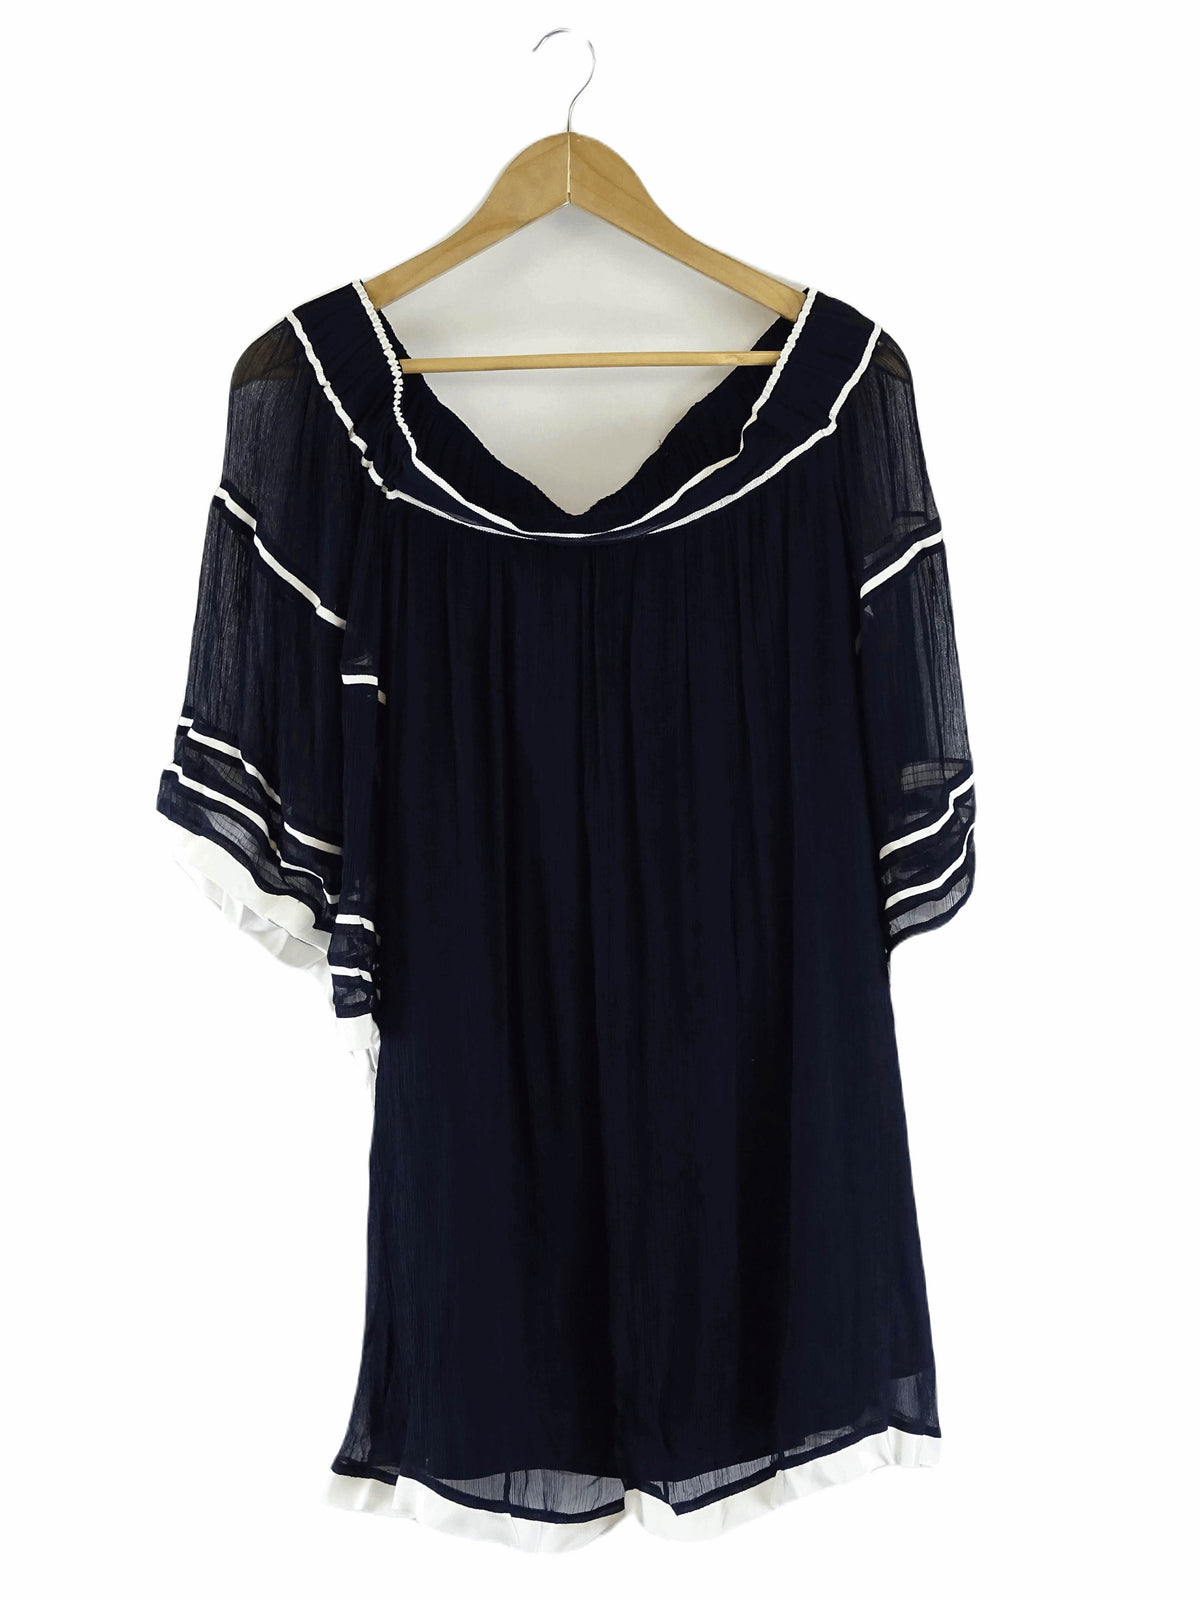 Witchery Navy and White Off the Shoulder Top 10